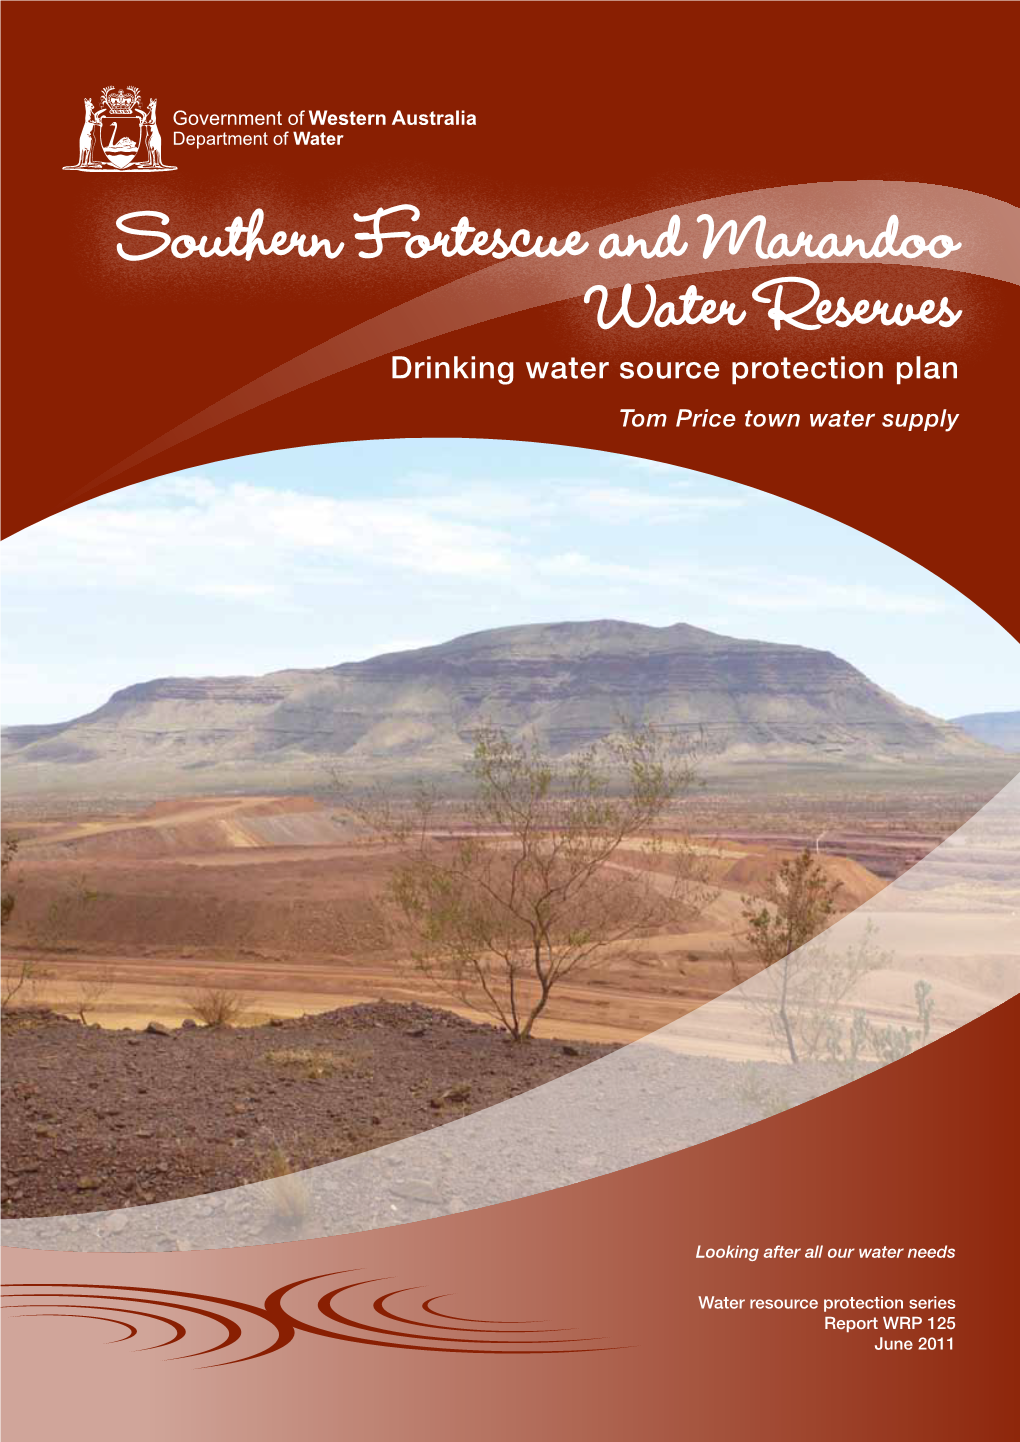 Southern Fortescue and Marandoo Water Reserves Drinking Water Source Protection Plan